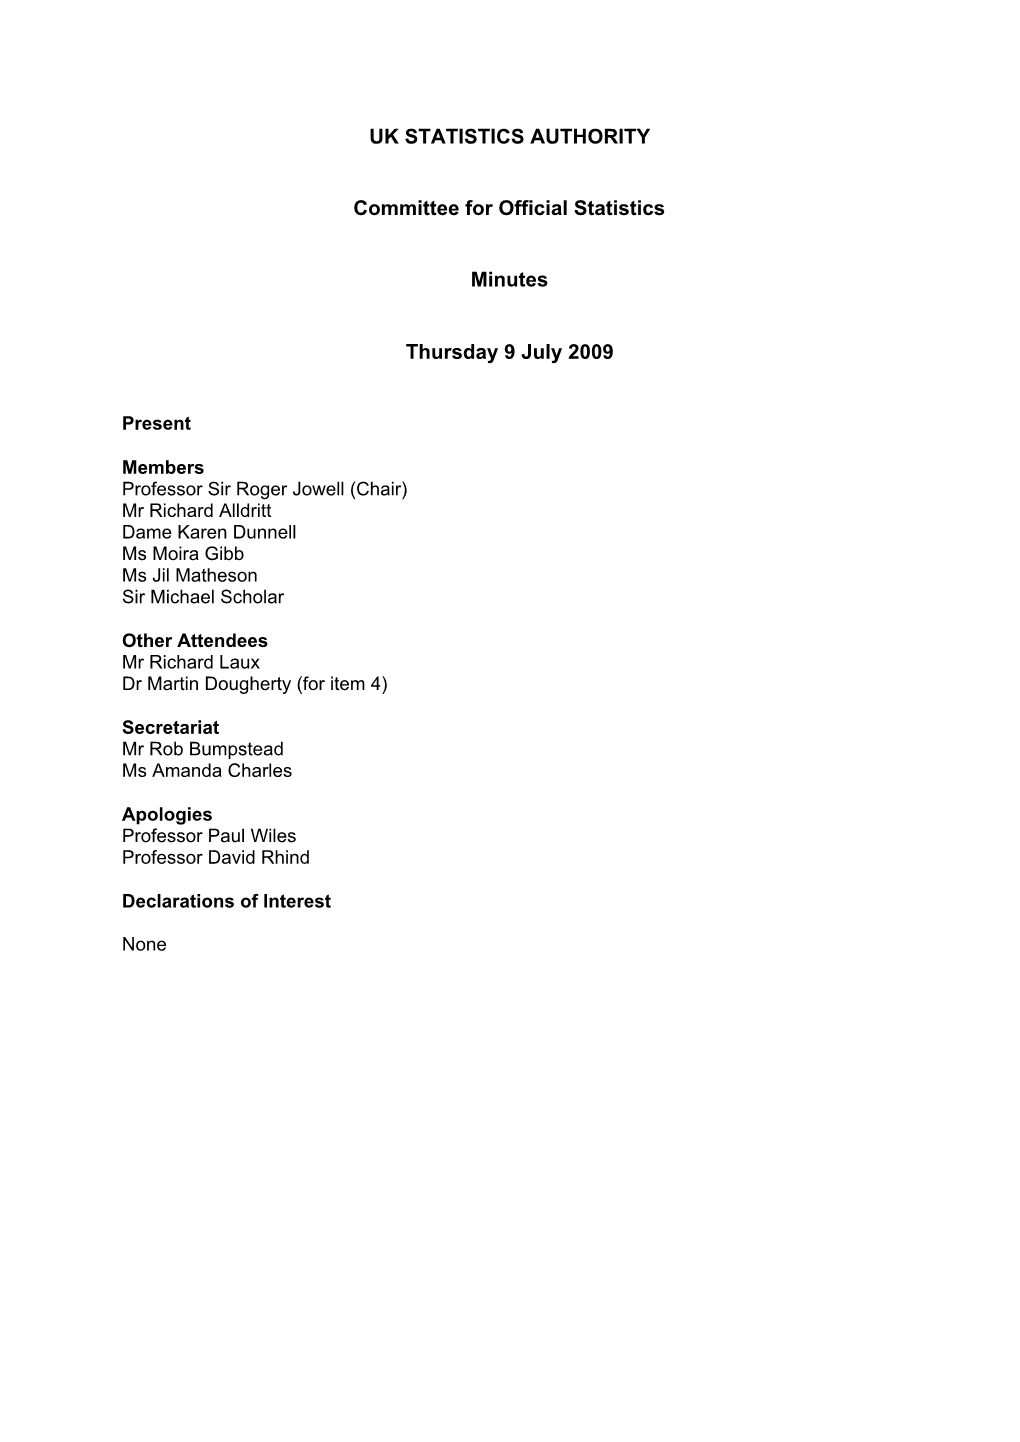 "Papers from the Committee for Official Statistics Meeting on 09 July 2009" in 0.00 Format